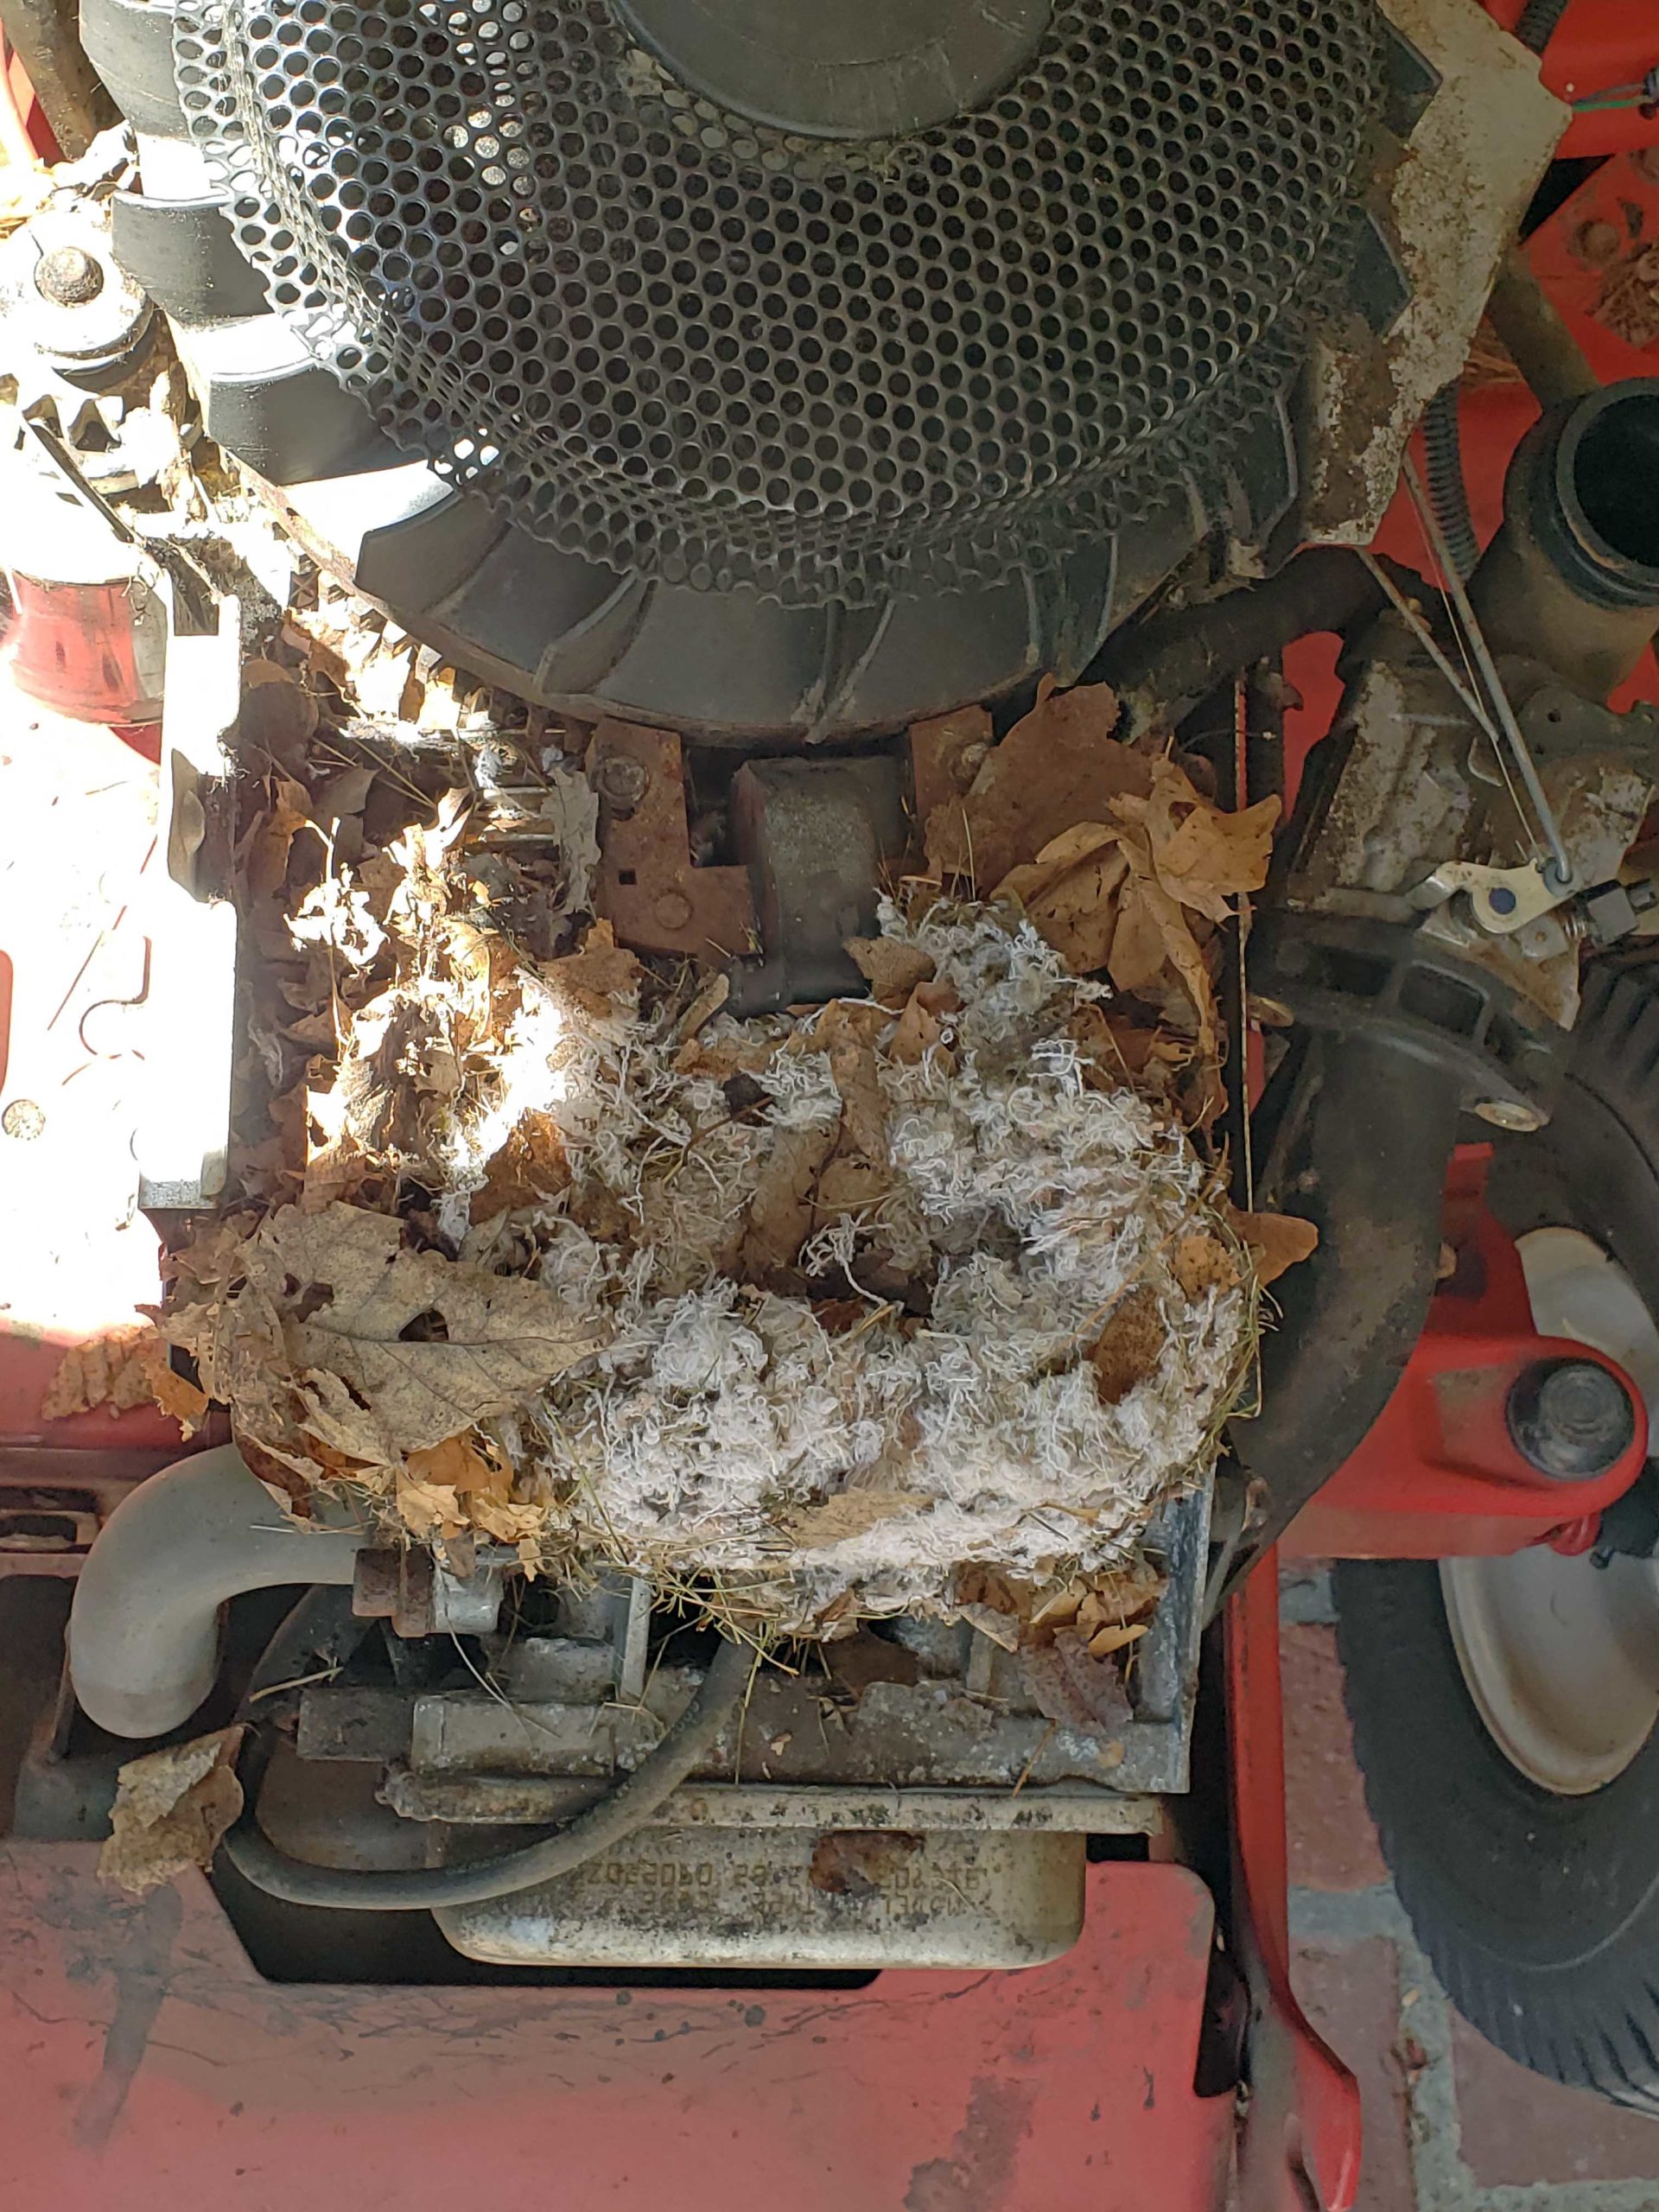 Mouse nest under engine cover will cause overheating in just 2-3 minutes of running! This is why we suggest a yearly tune up to prevent this kind of permanent damage!